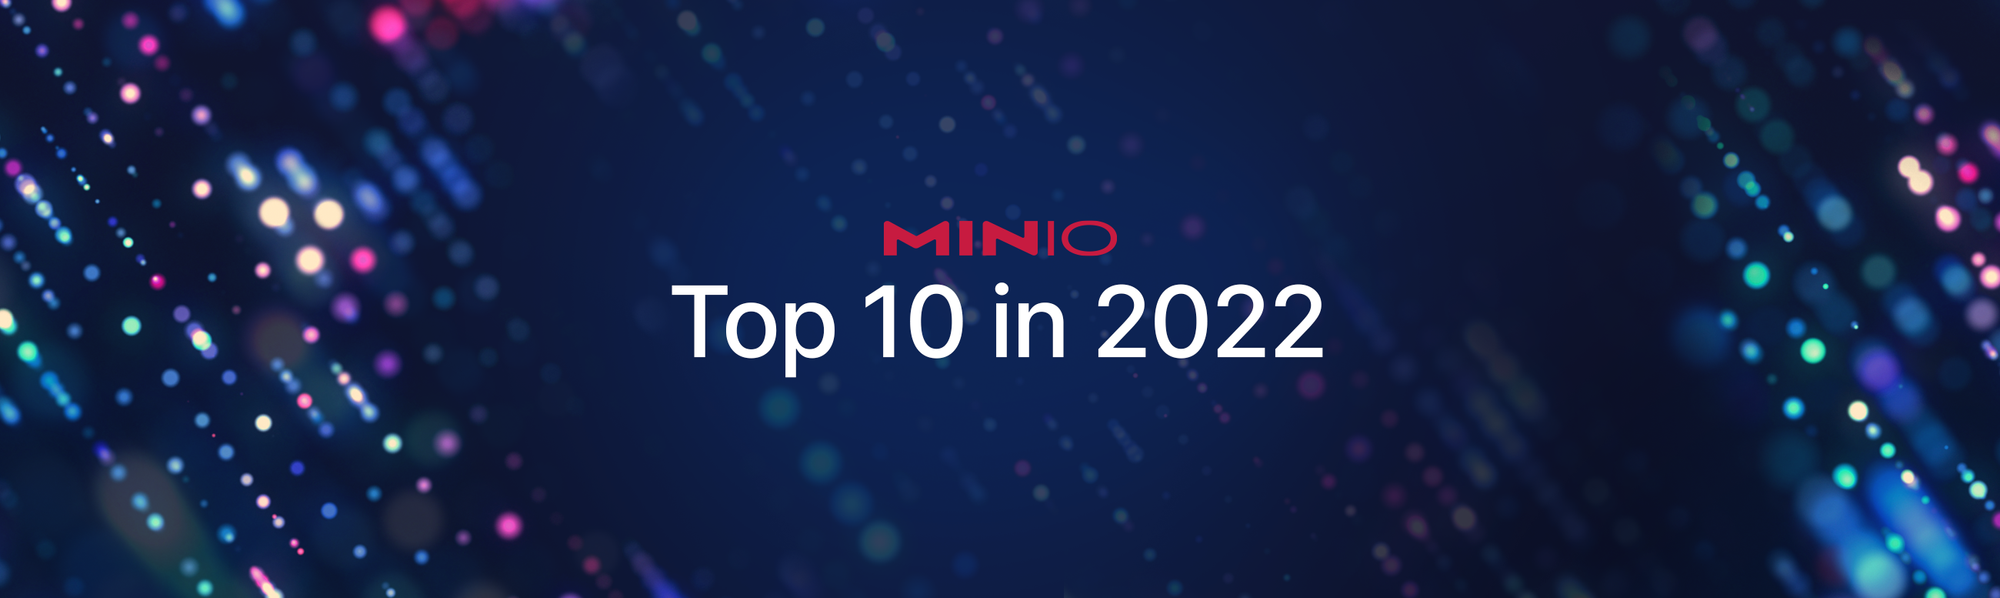 The Blog Year in Review: Top 10 for 2022